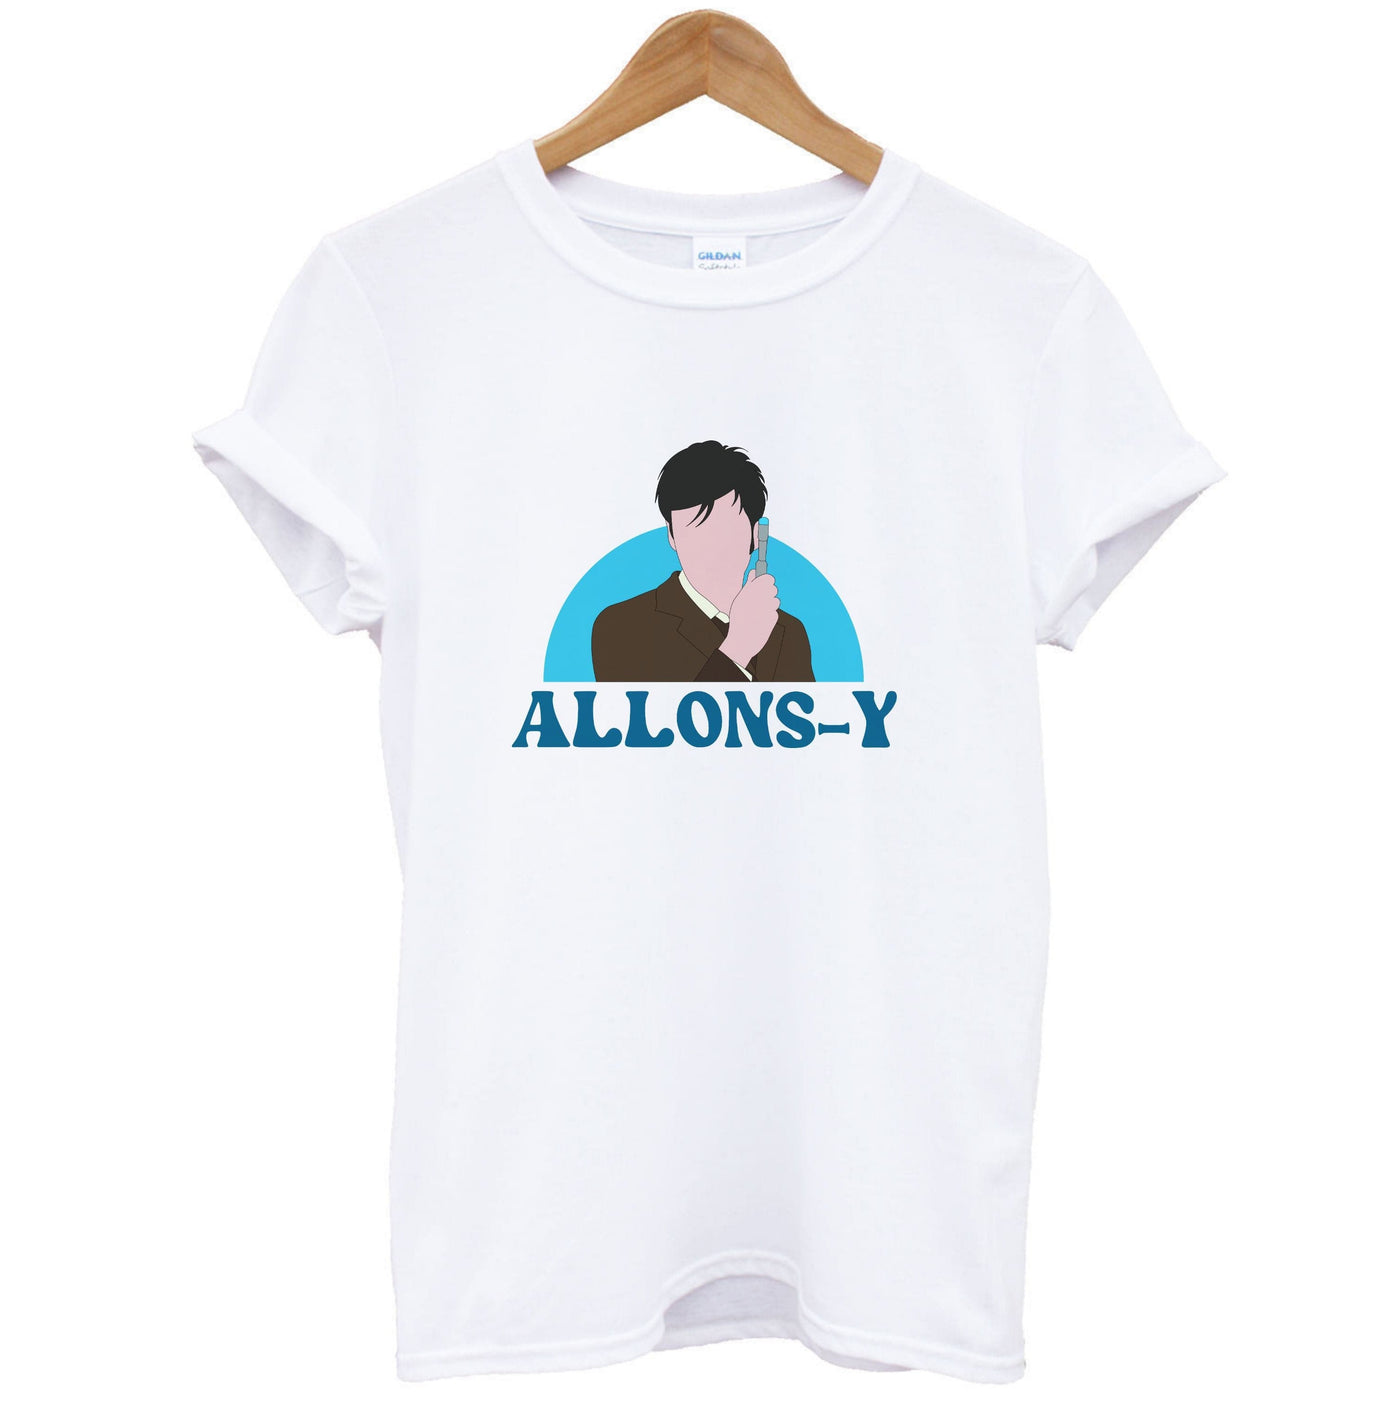 Allons-y - Doctor Who T-Shirt